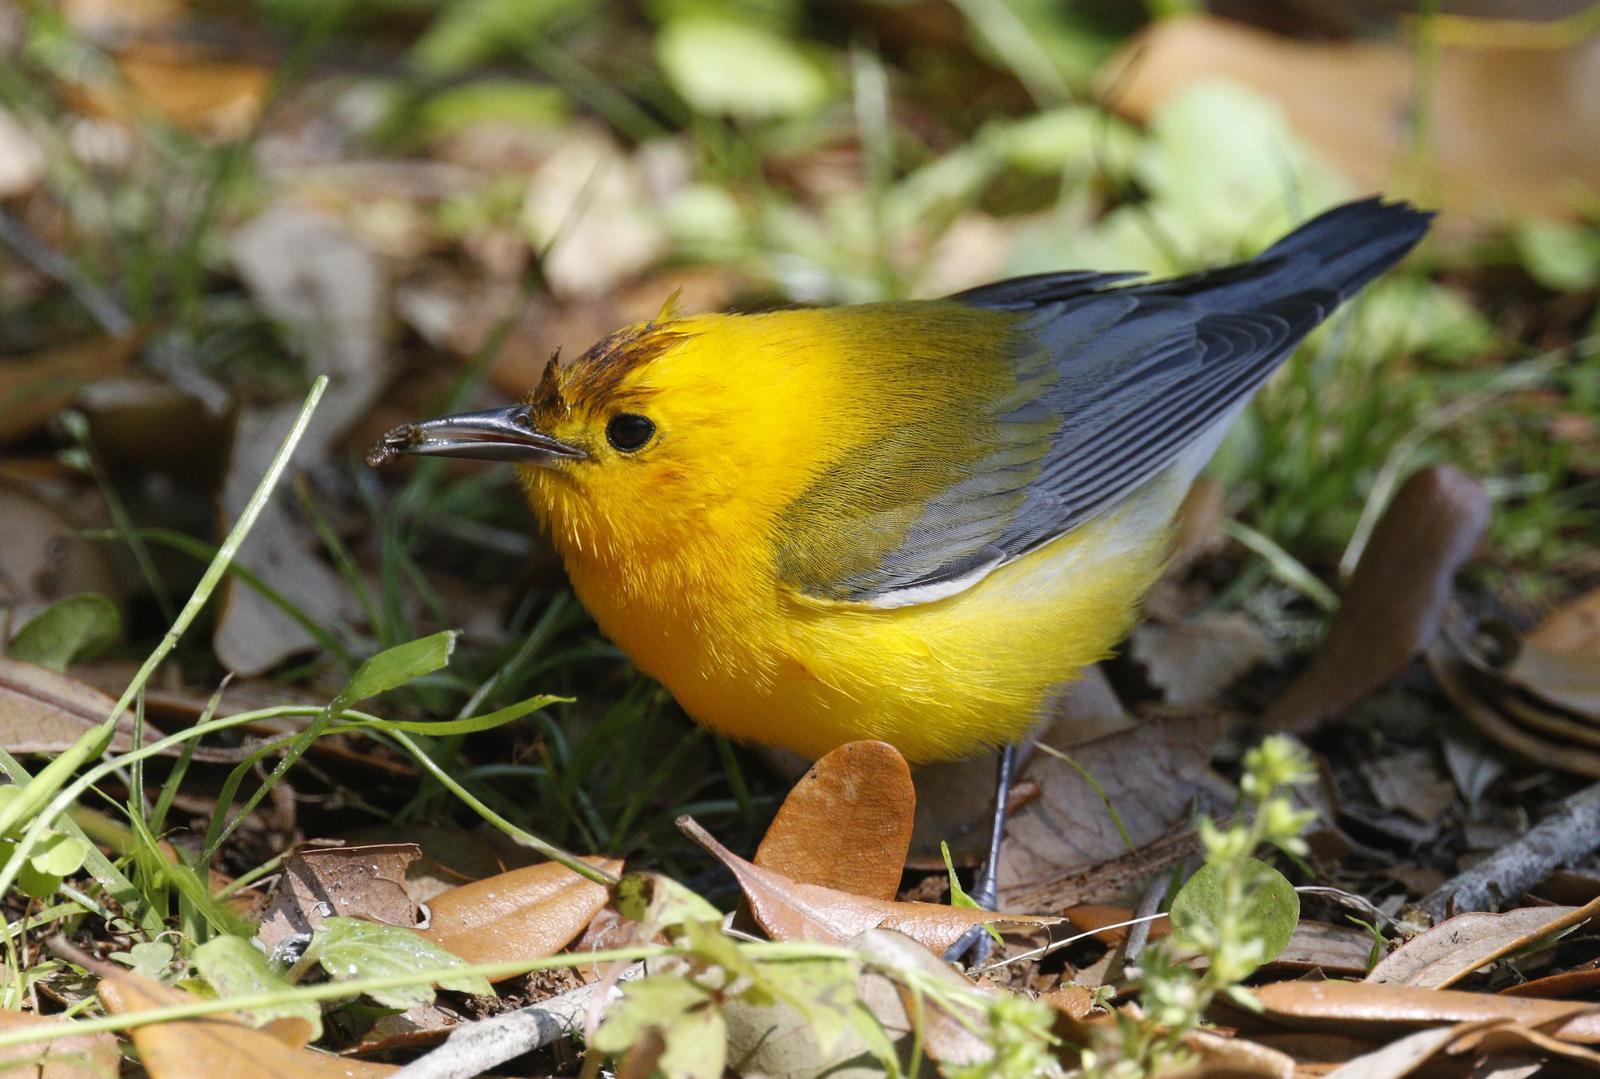 Prothonotary Warbler Photo by Emily Willoughby